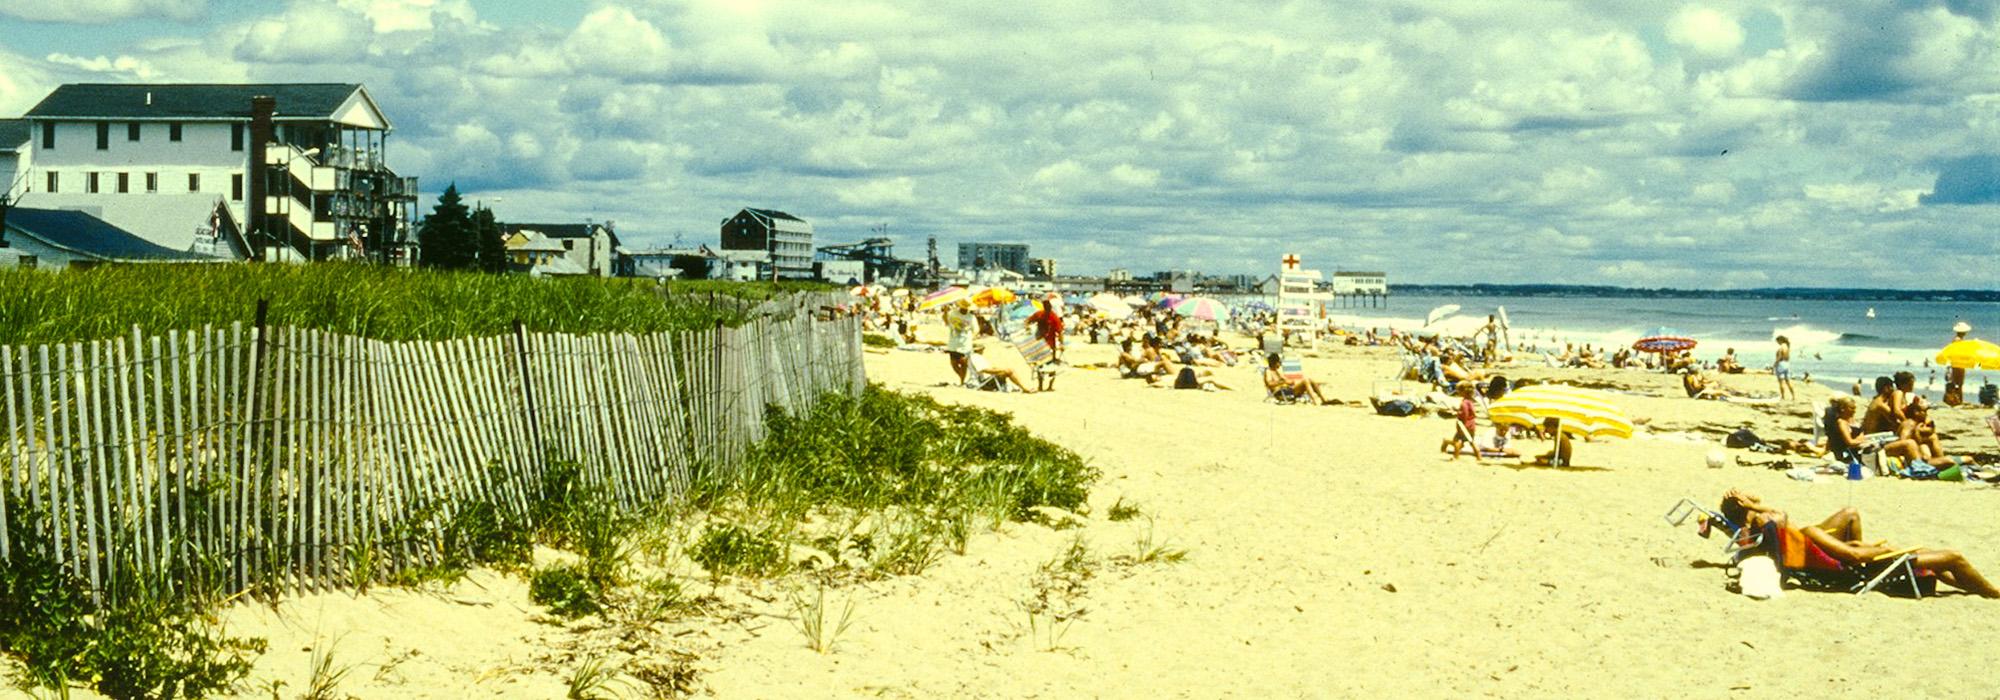 Land of Old Orchard Beach & Camp Meeting Association, Old Orchard Beach, ME